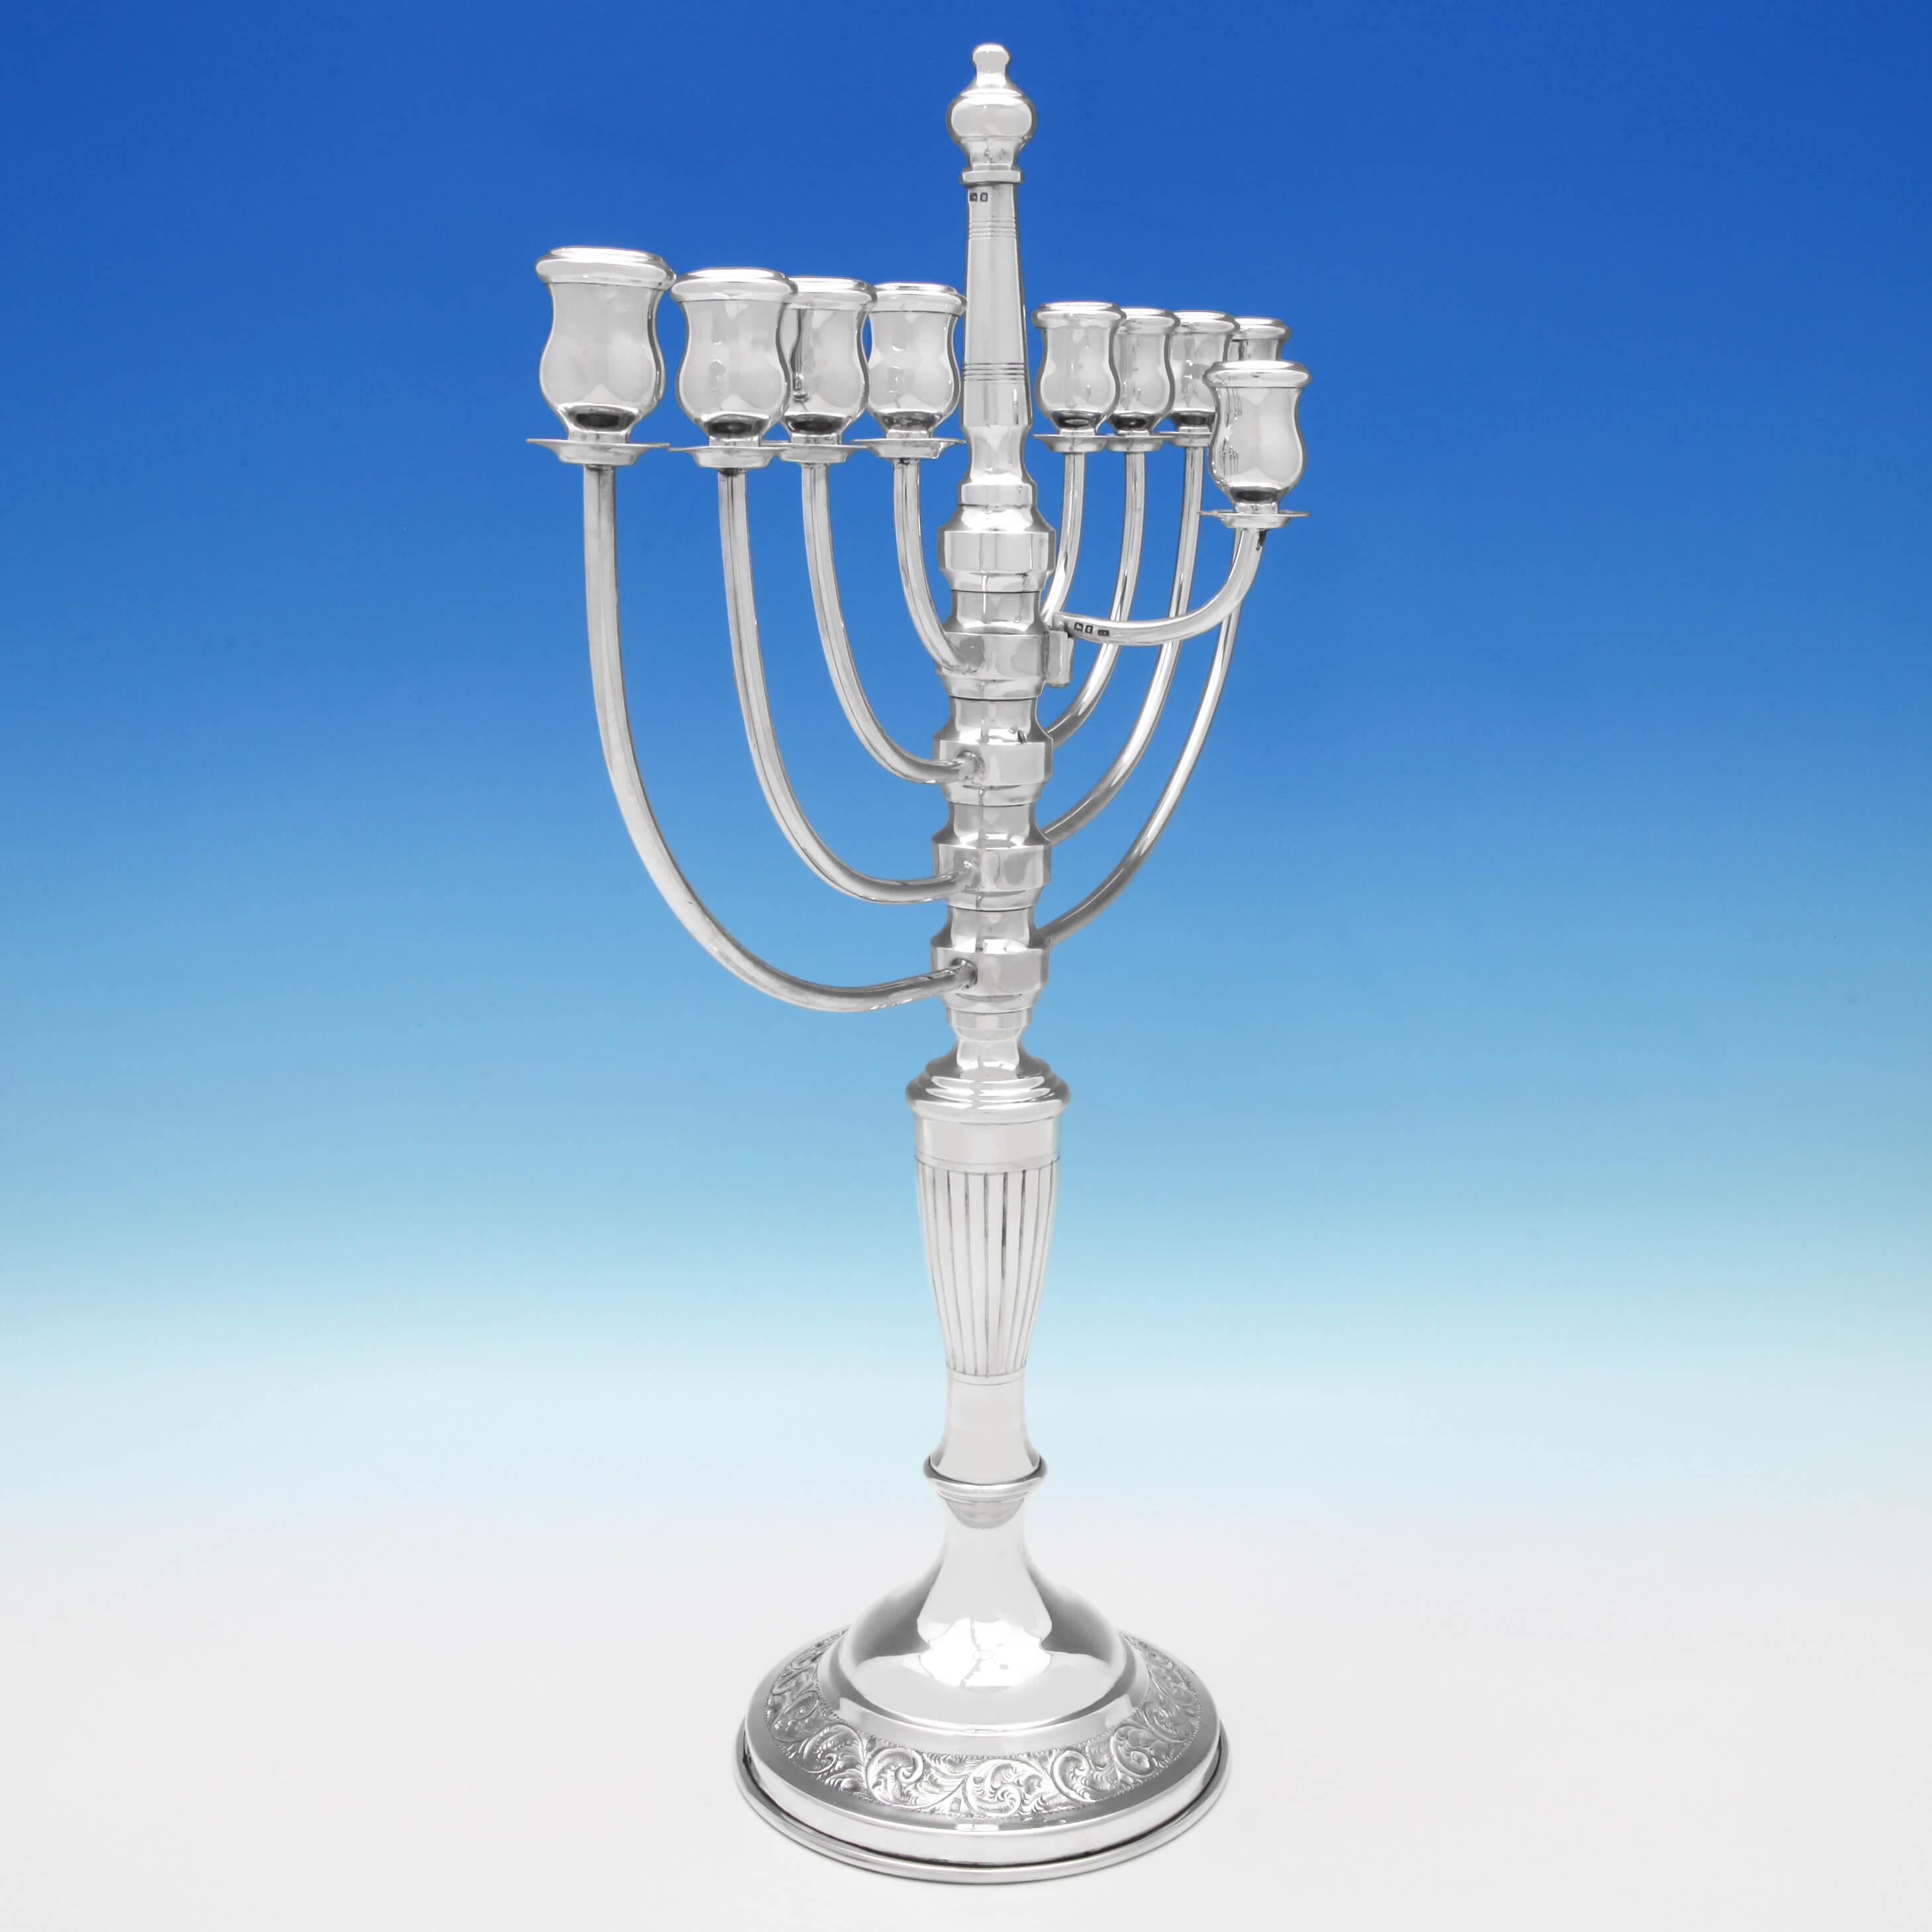 Hallmarked in London in 1921 by Joseph Zweig, this striking, large, George V, Sterling Silver Menorah, features a fluted column, with two bands of reed decoration at the top, plain loop branches and acanthus detailing to the base. The menorah